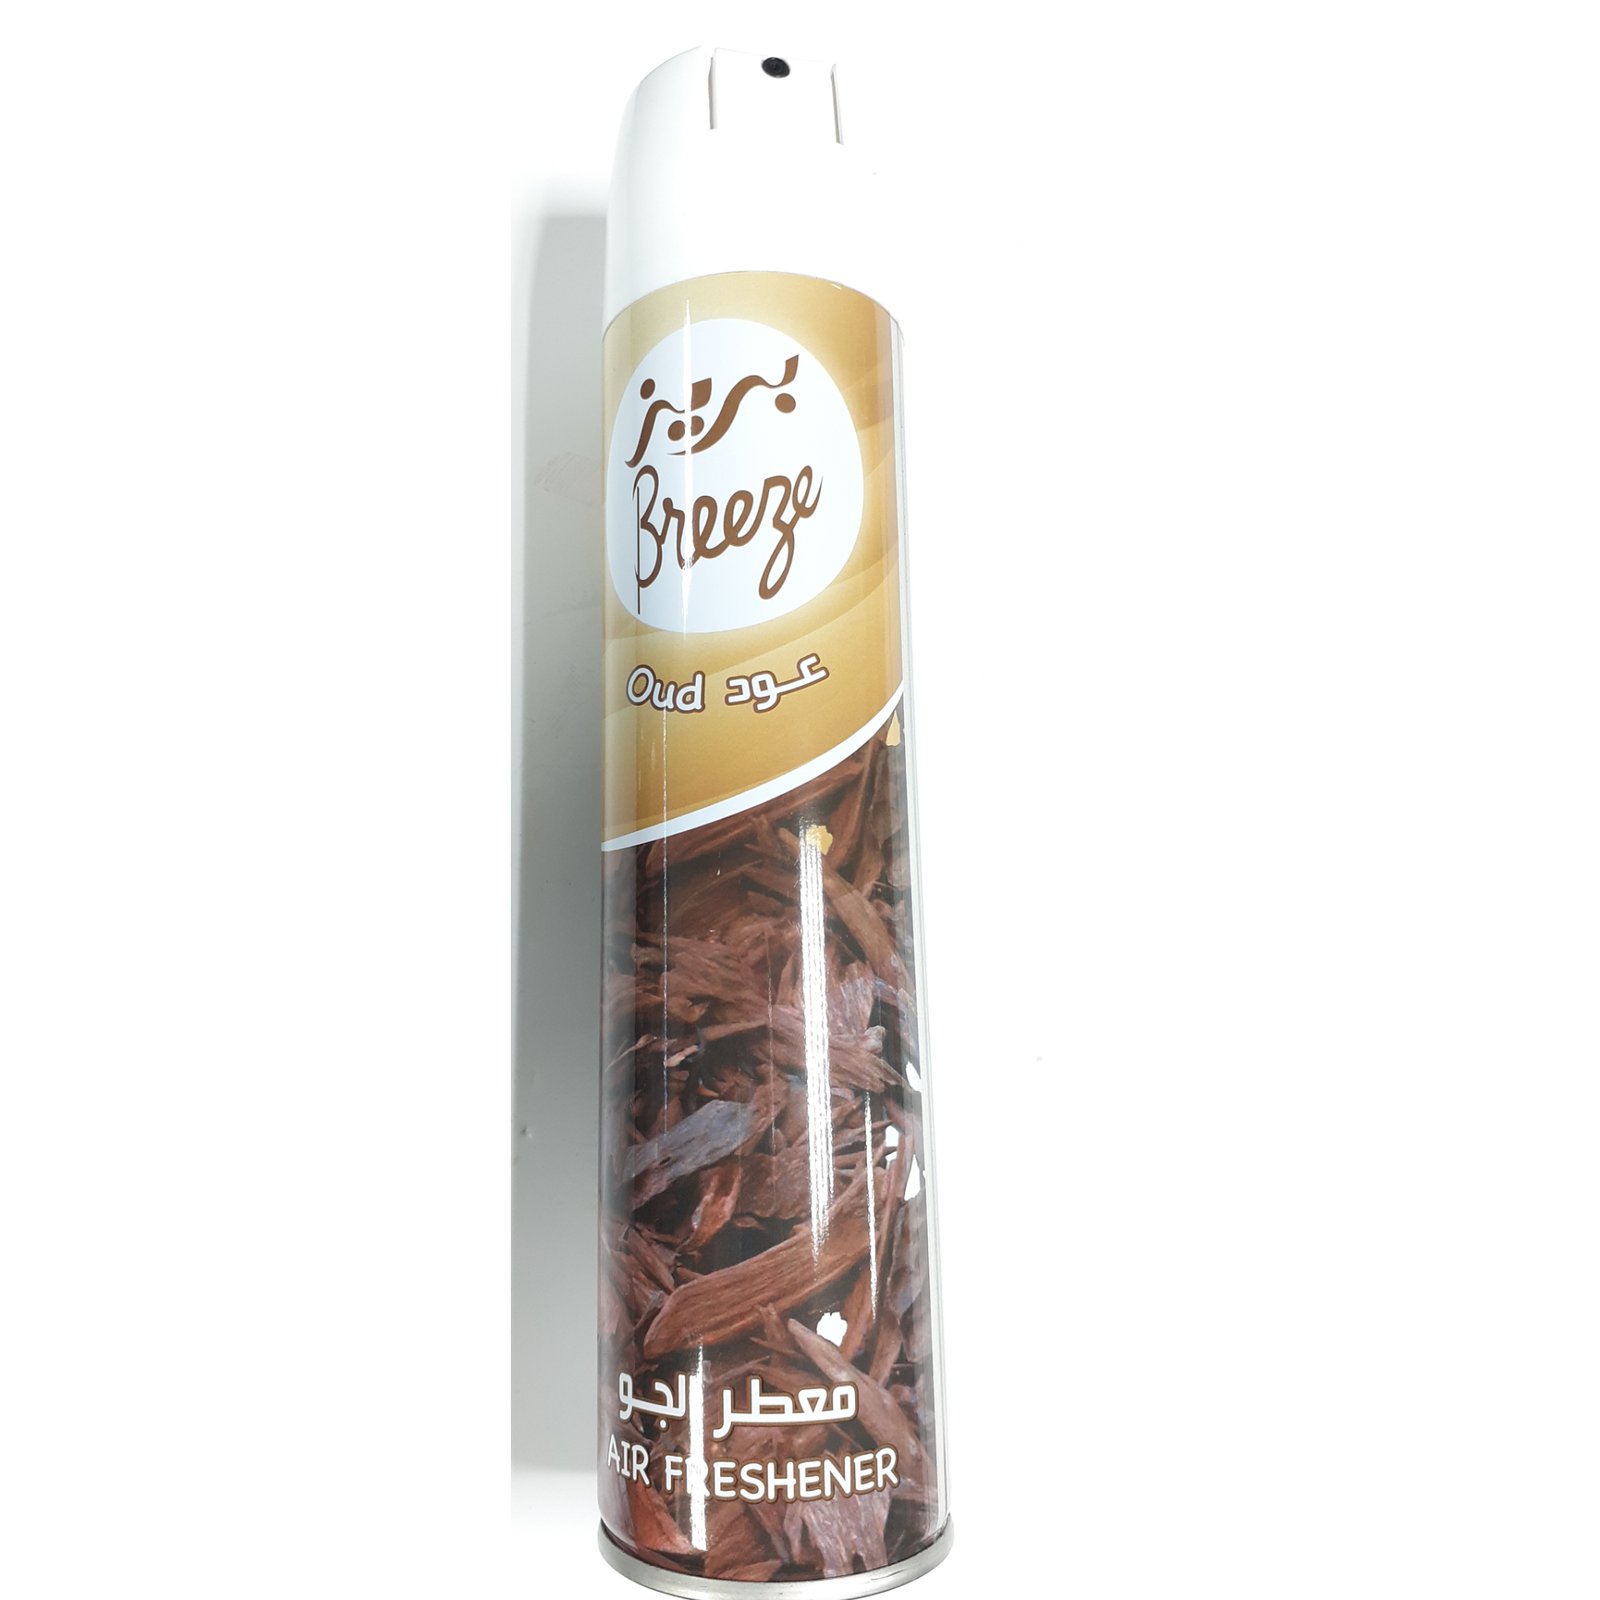 air freshener with Oud